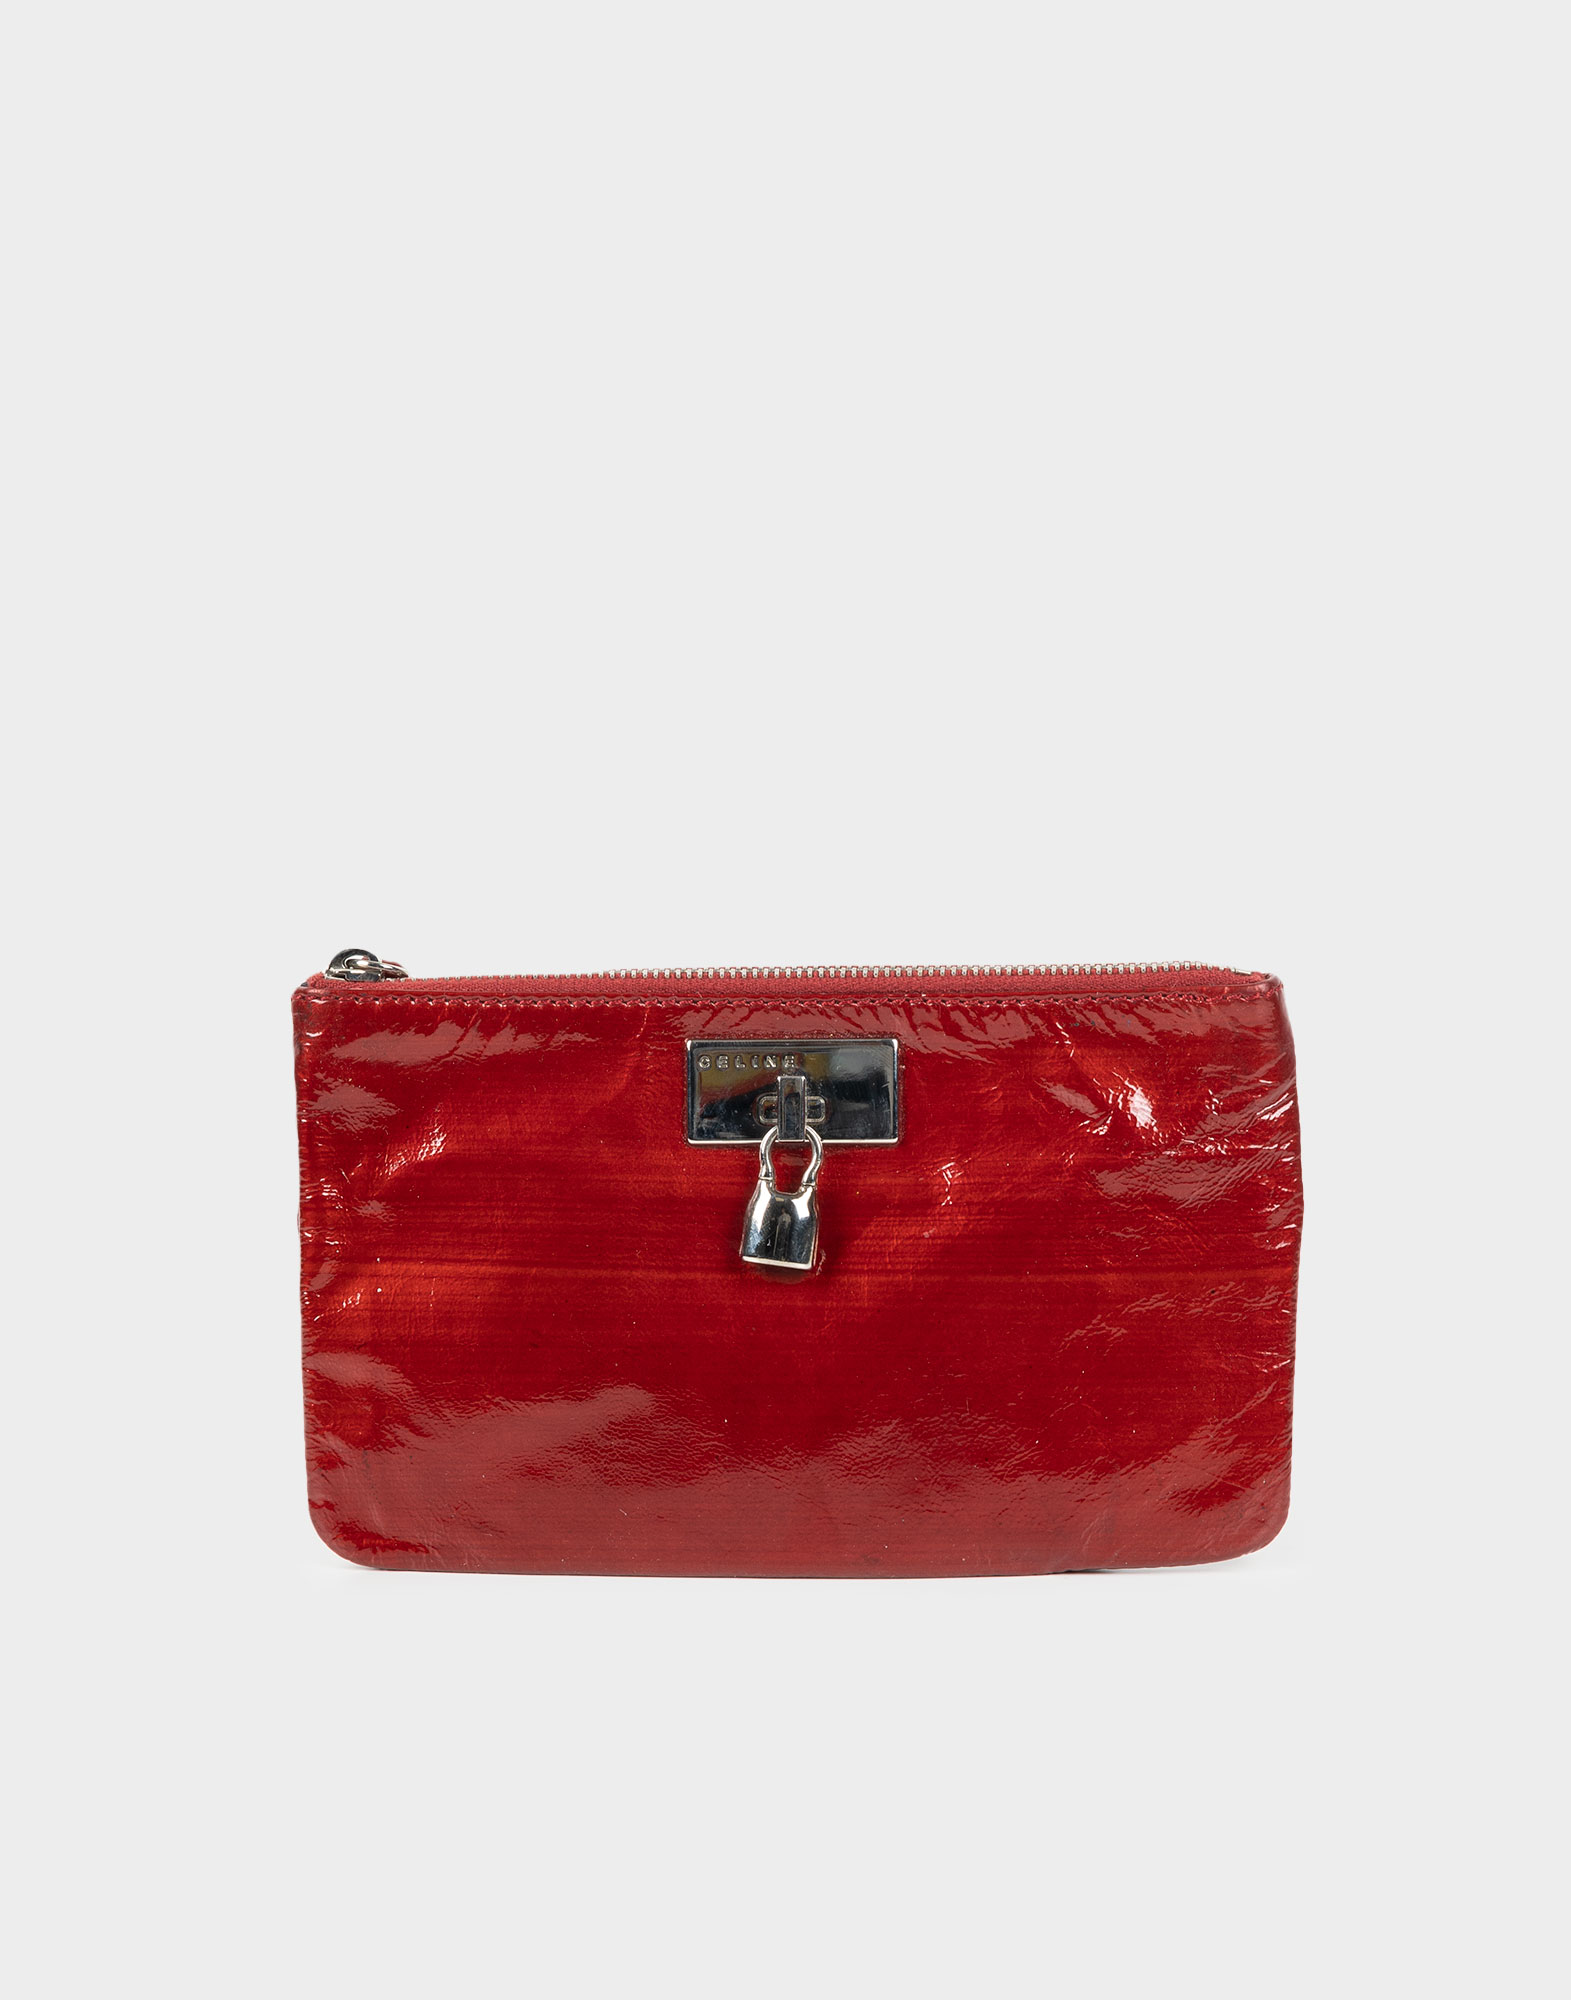 women's red patent leather coin purse with upper parting, padlock on front